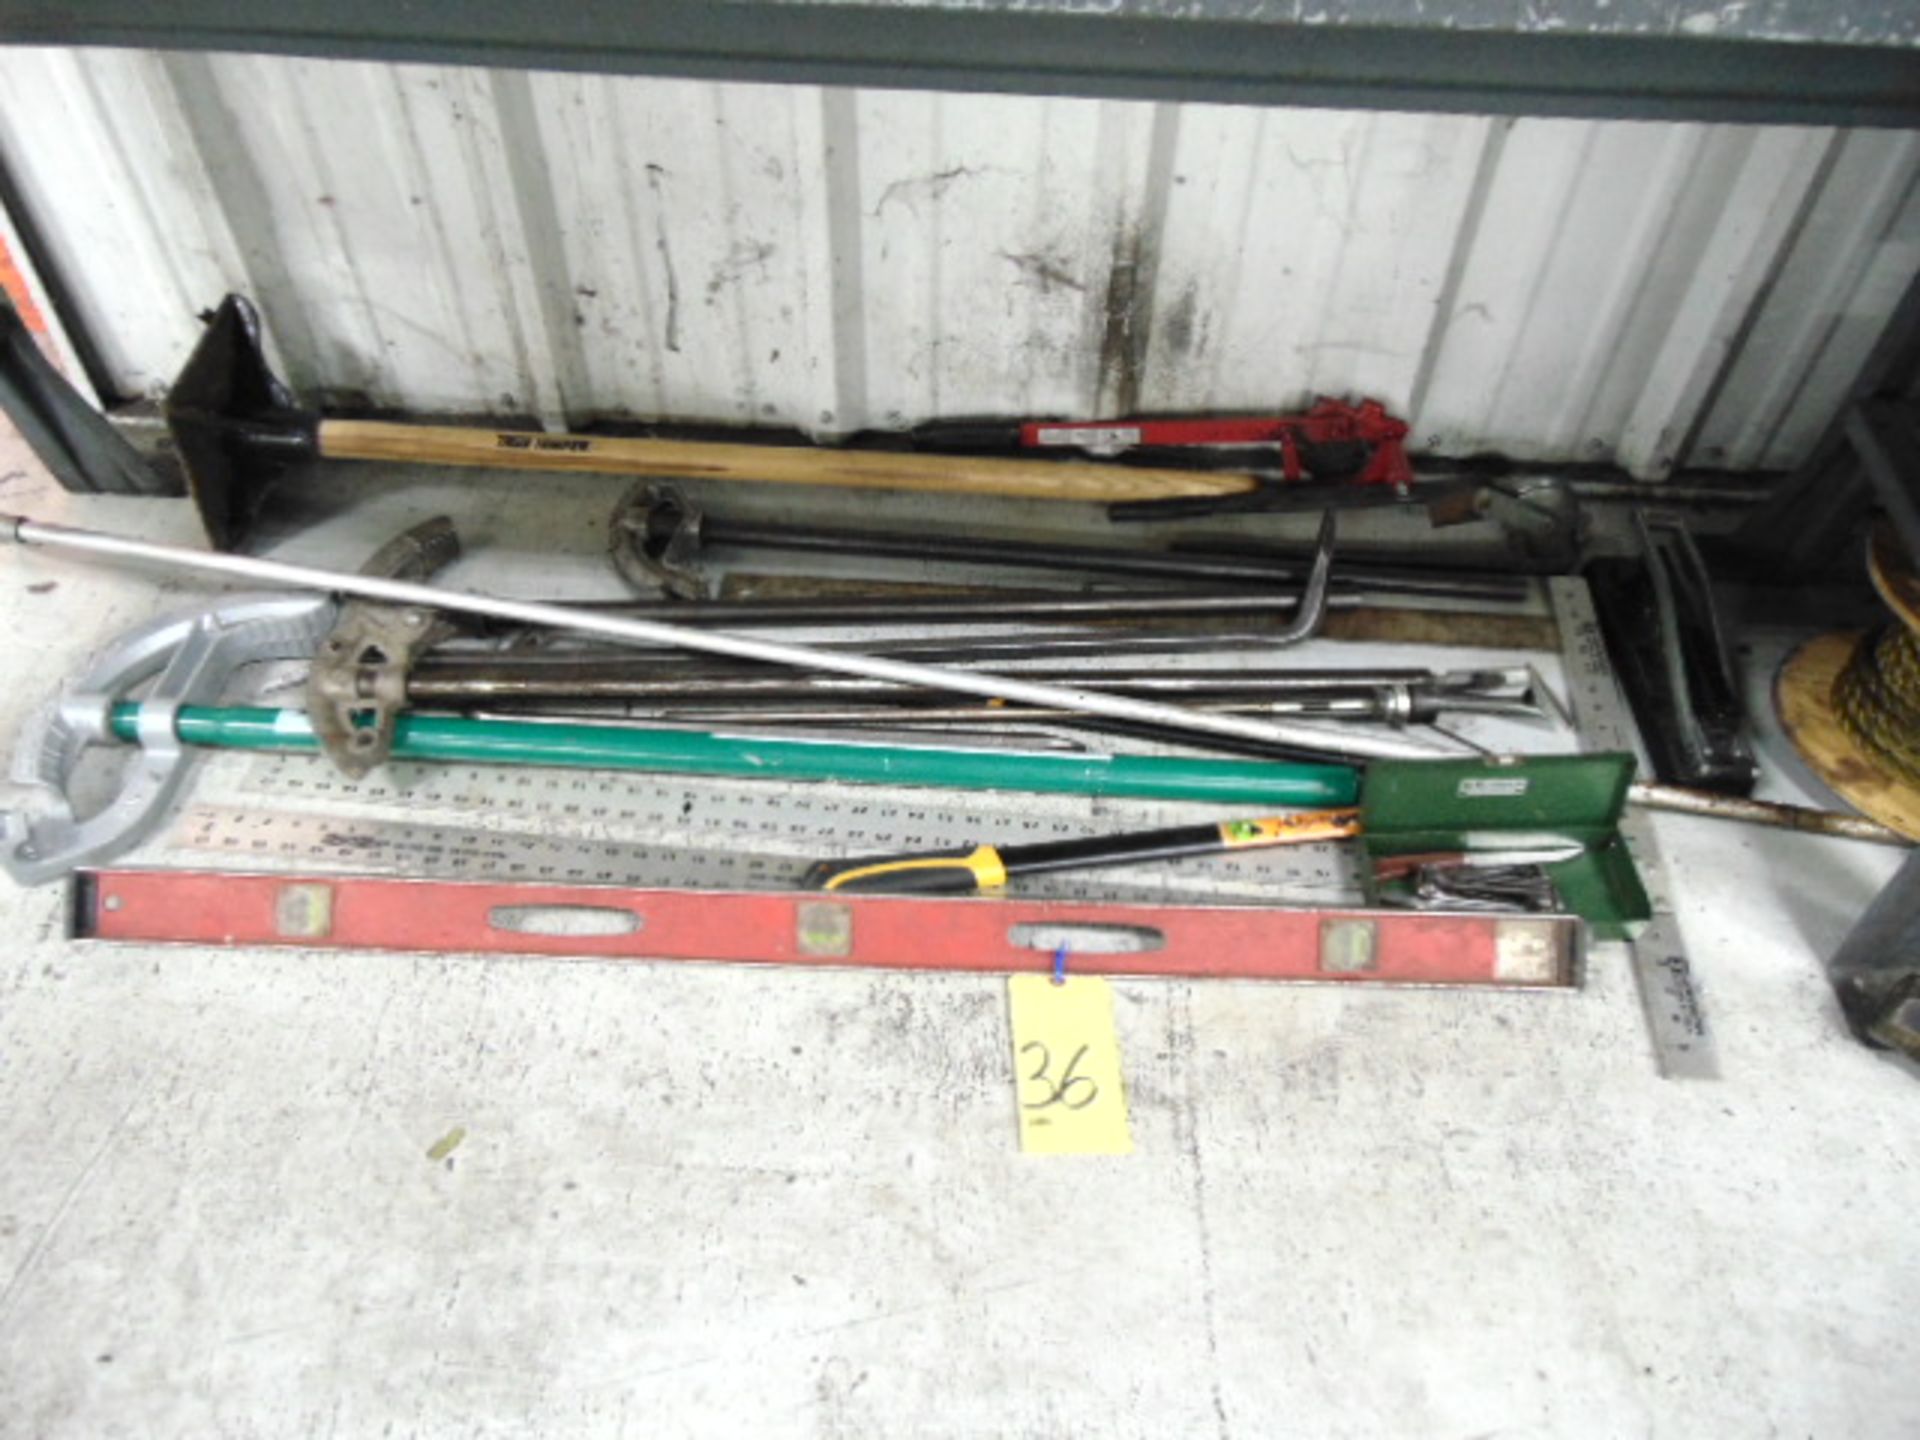 LOT CONSISTING OF: hand tools & misc., assorted (under three benches)